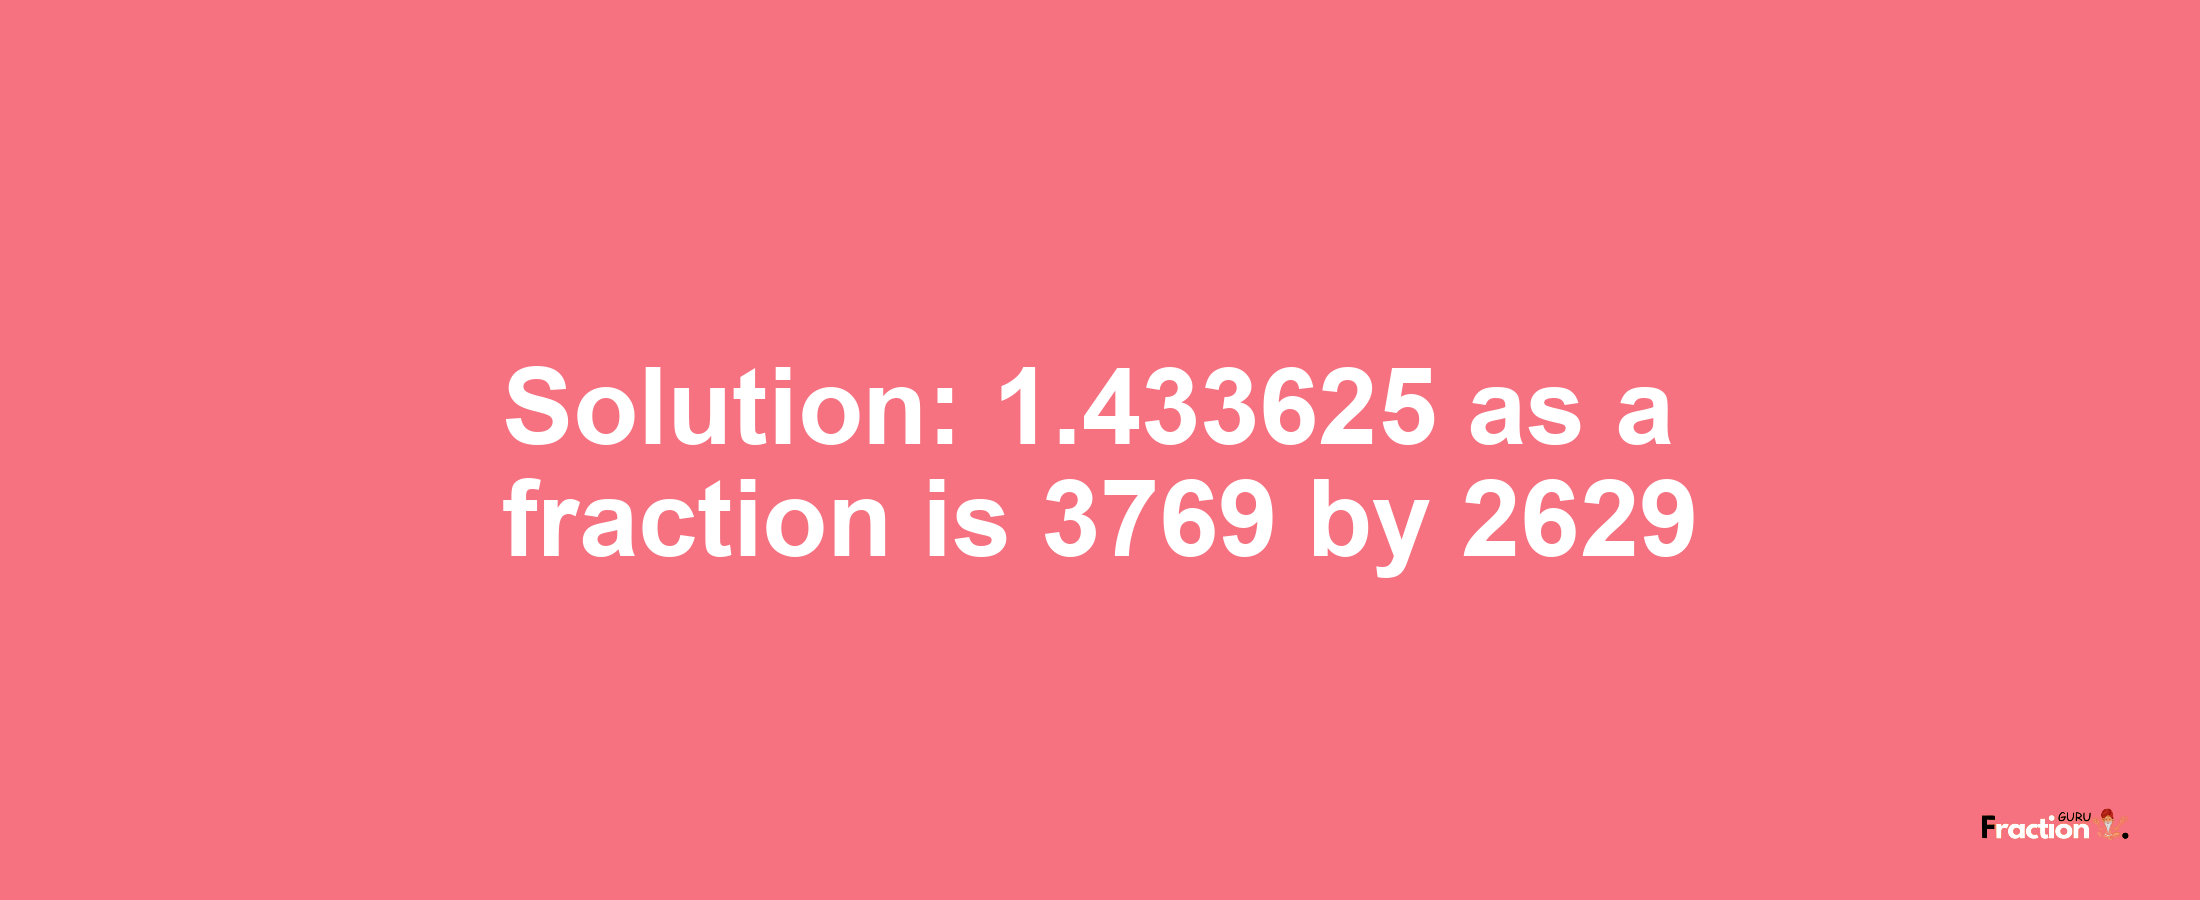 Solution:1.433625 as a fraction is 3769/2629